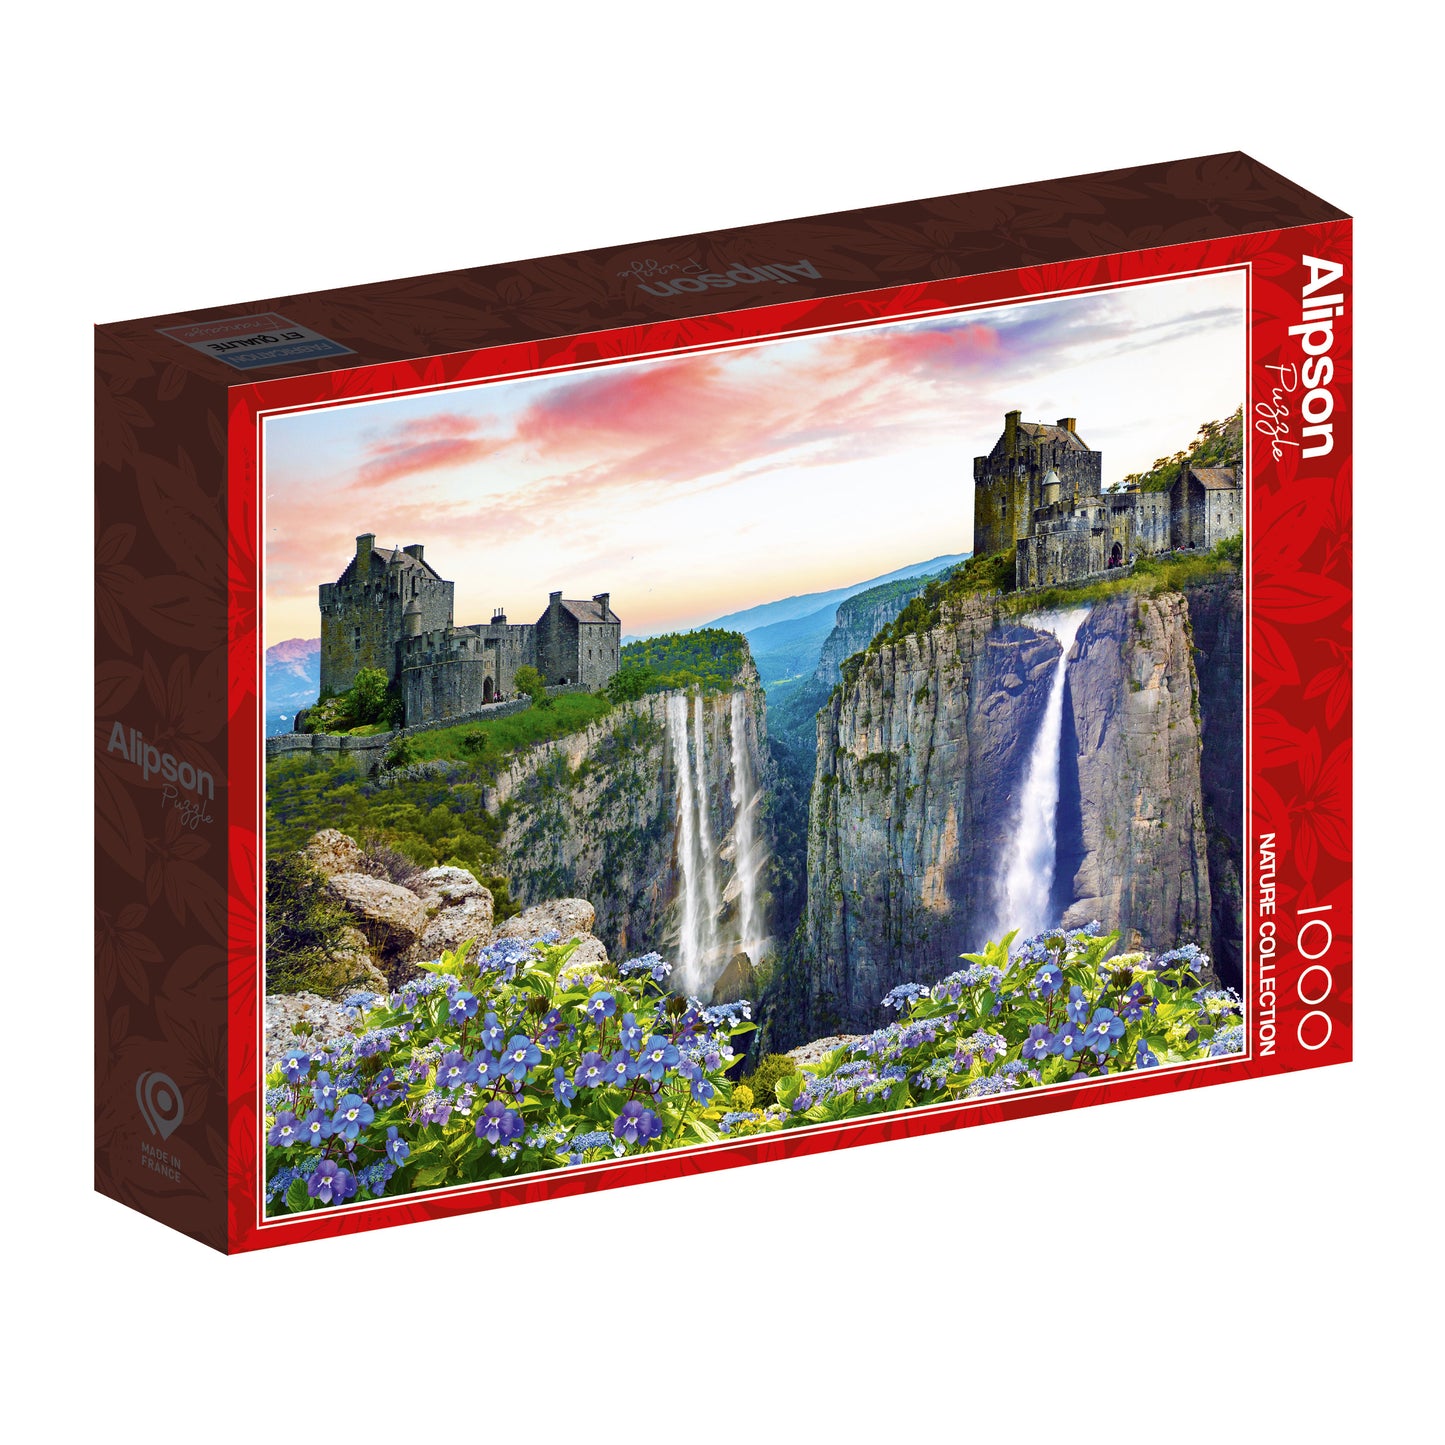 Alipson - Nature Collection - 1000 Piece Jigsaw Puzzle